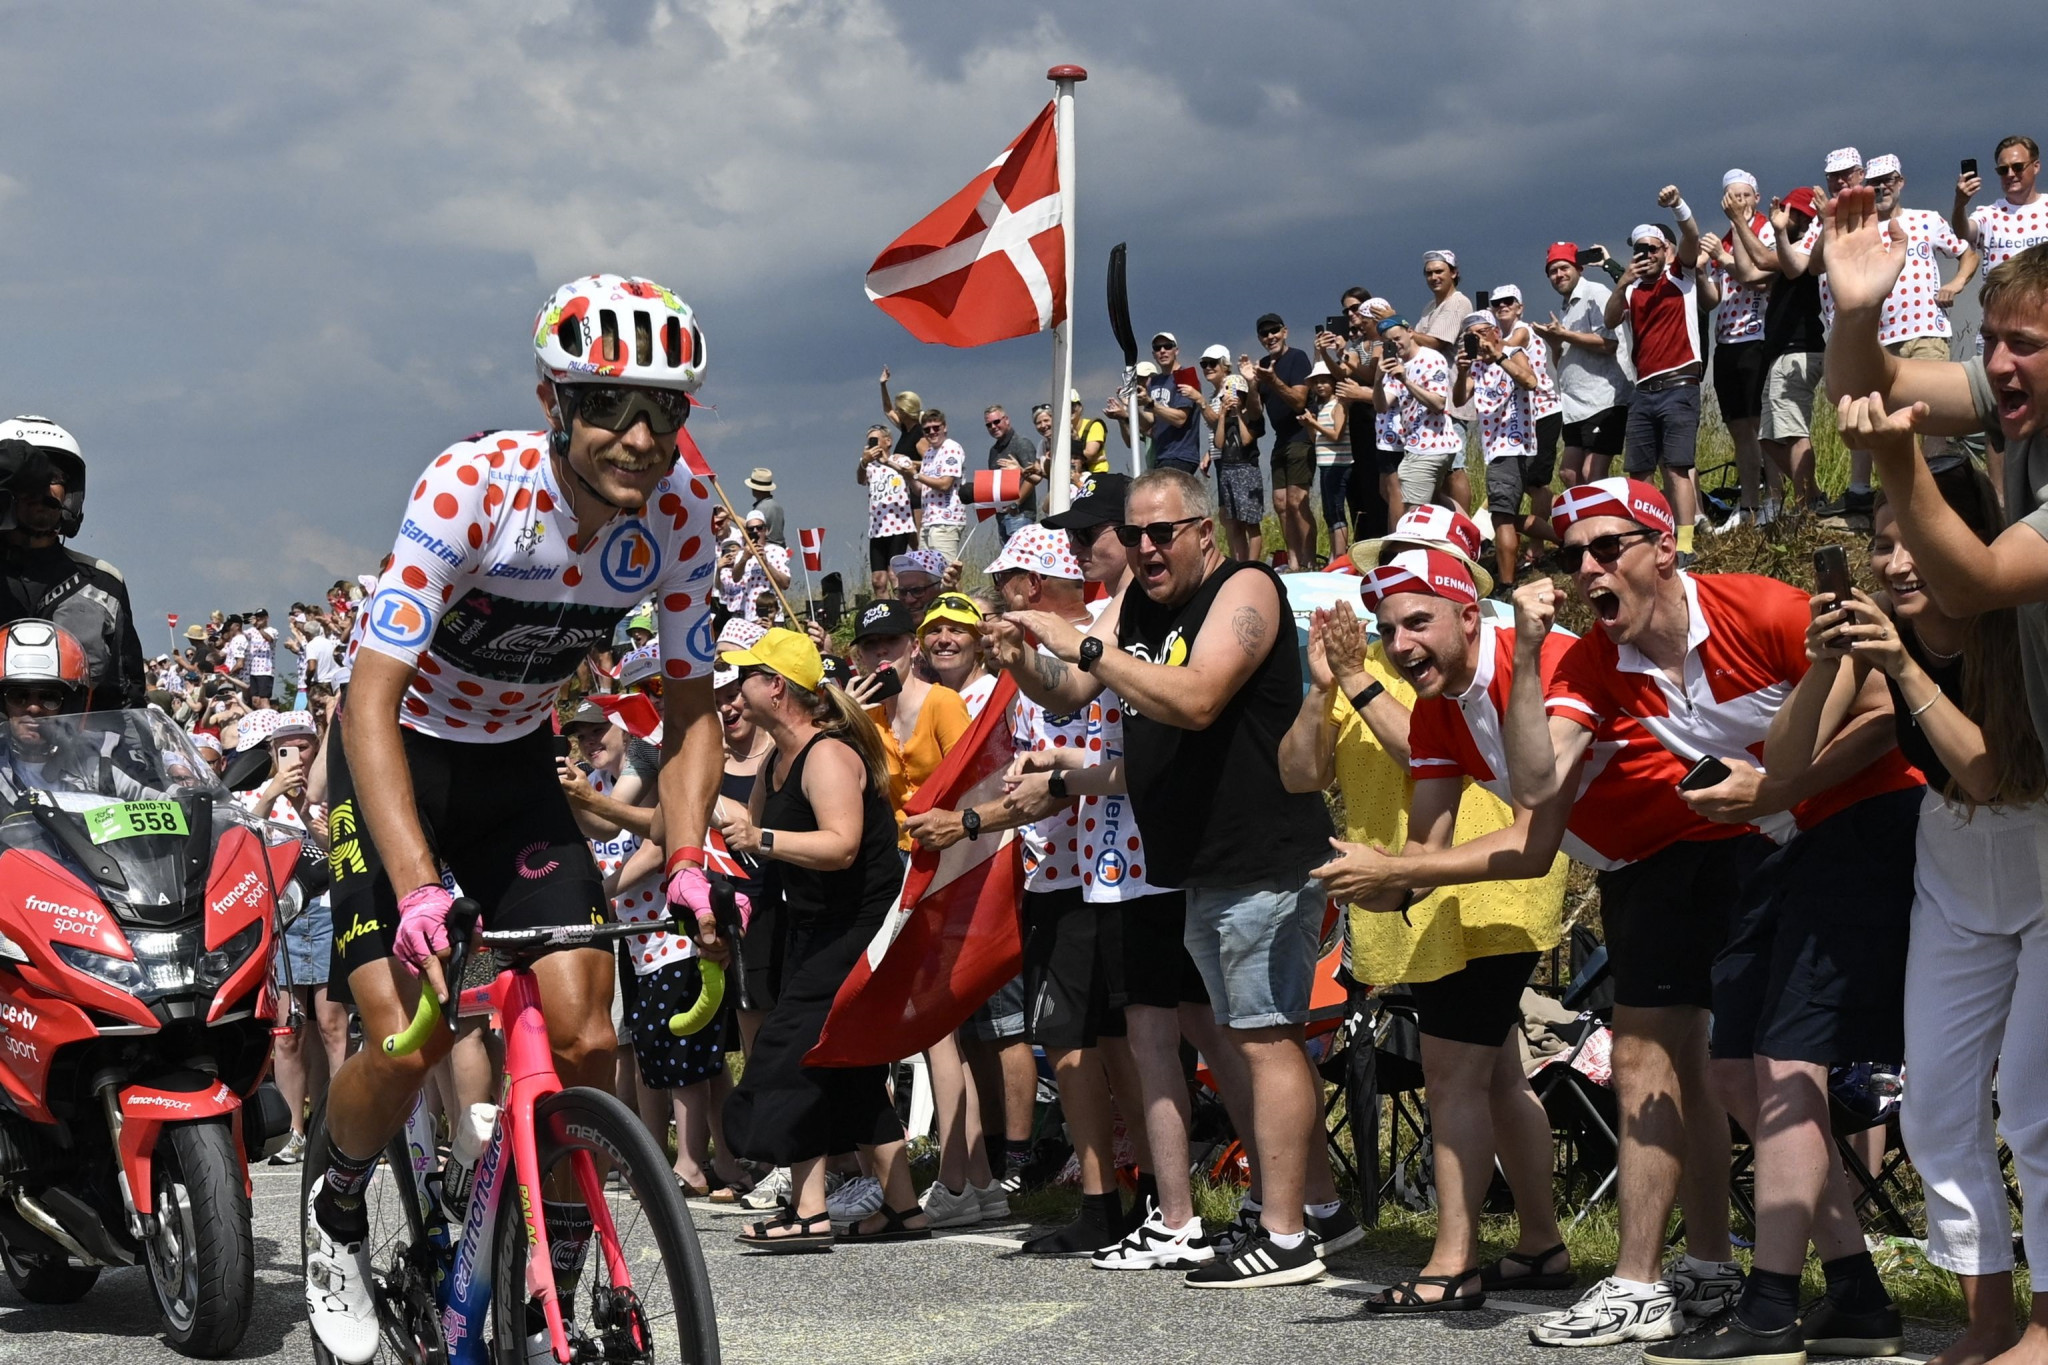 Danish fans got the chance to enjoy the Tour de France in their home country during the staging of the Grand Départ ©Getty Images